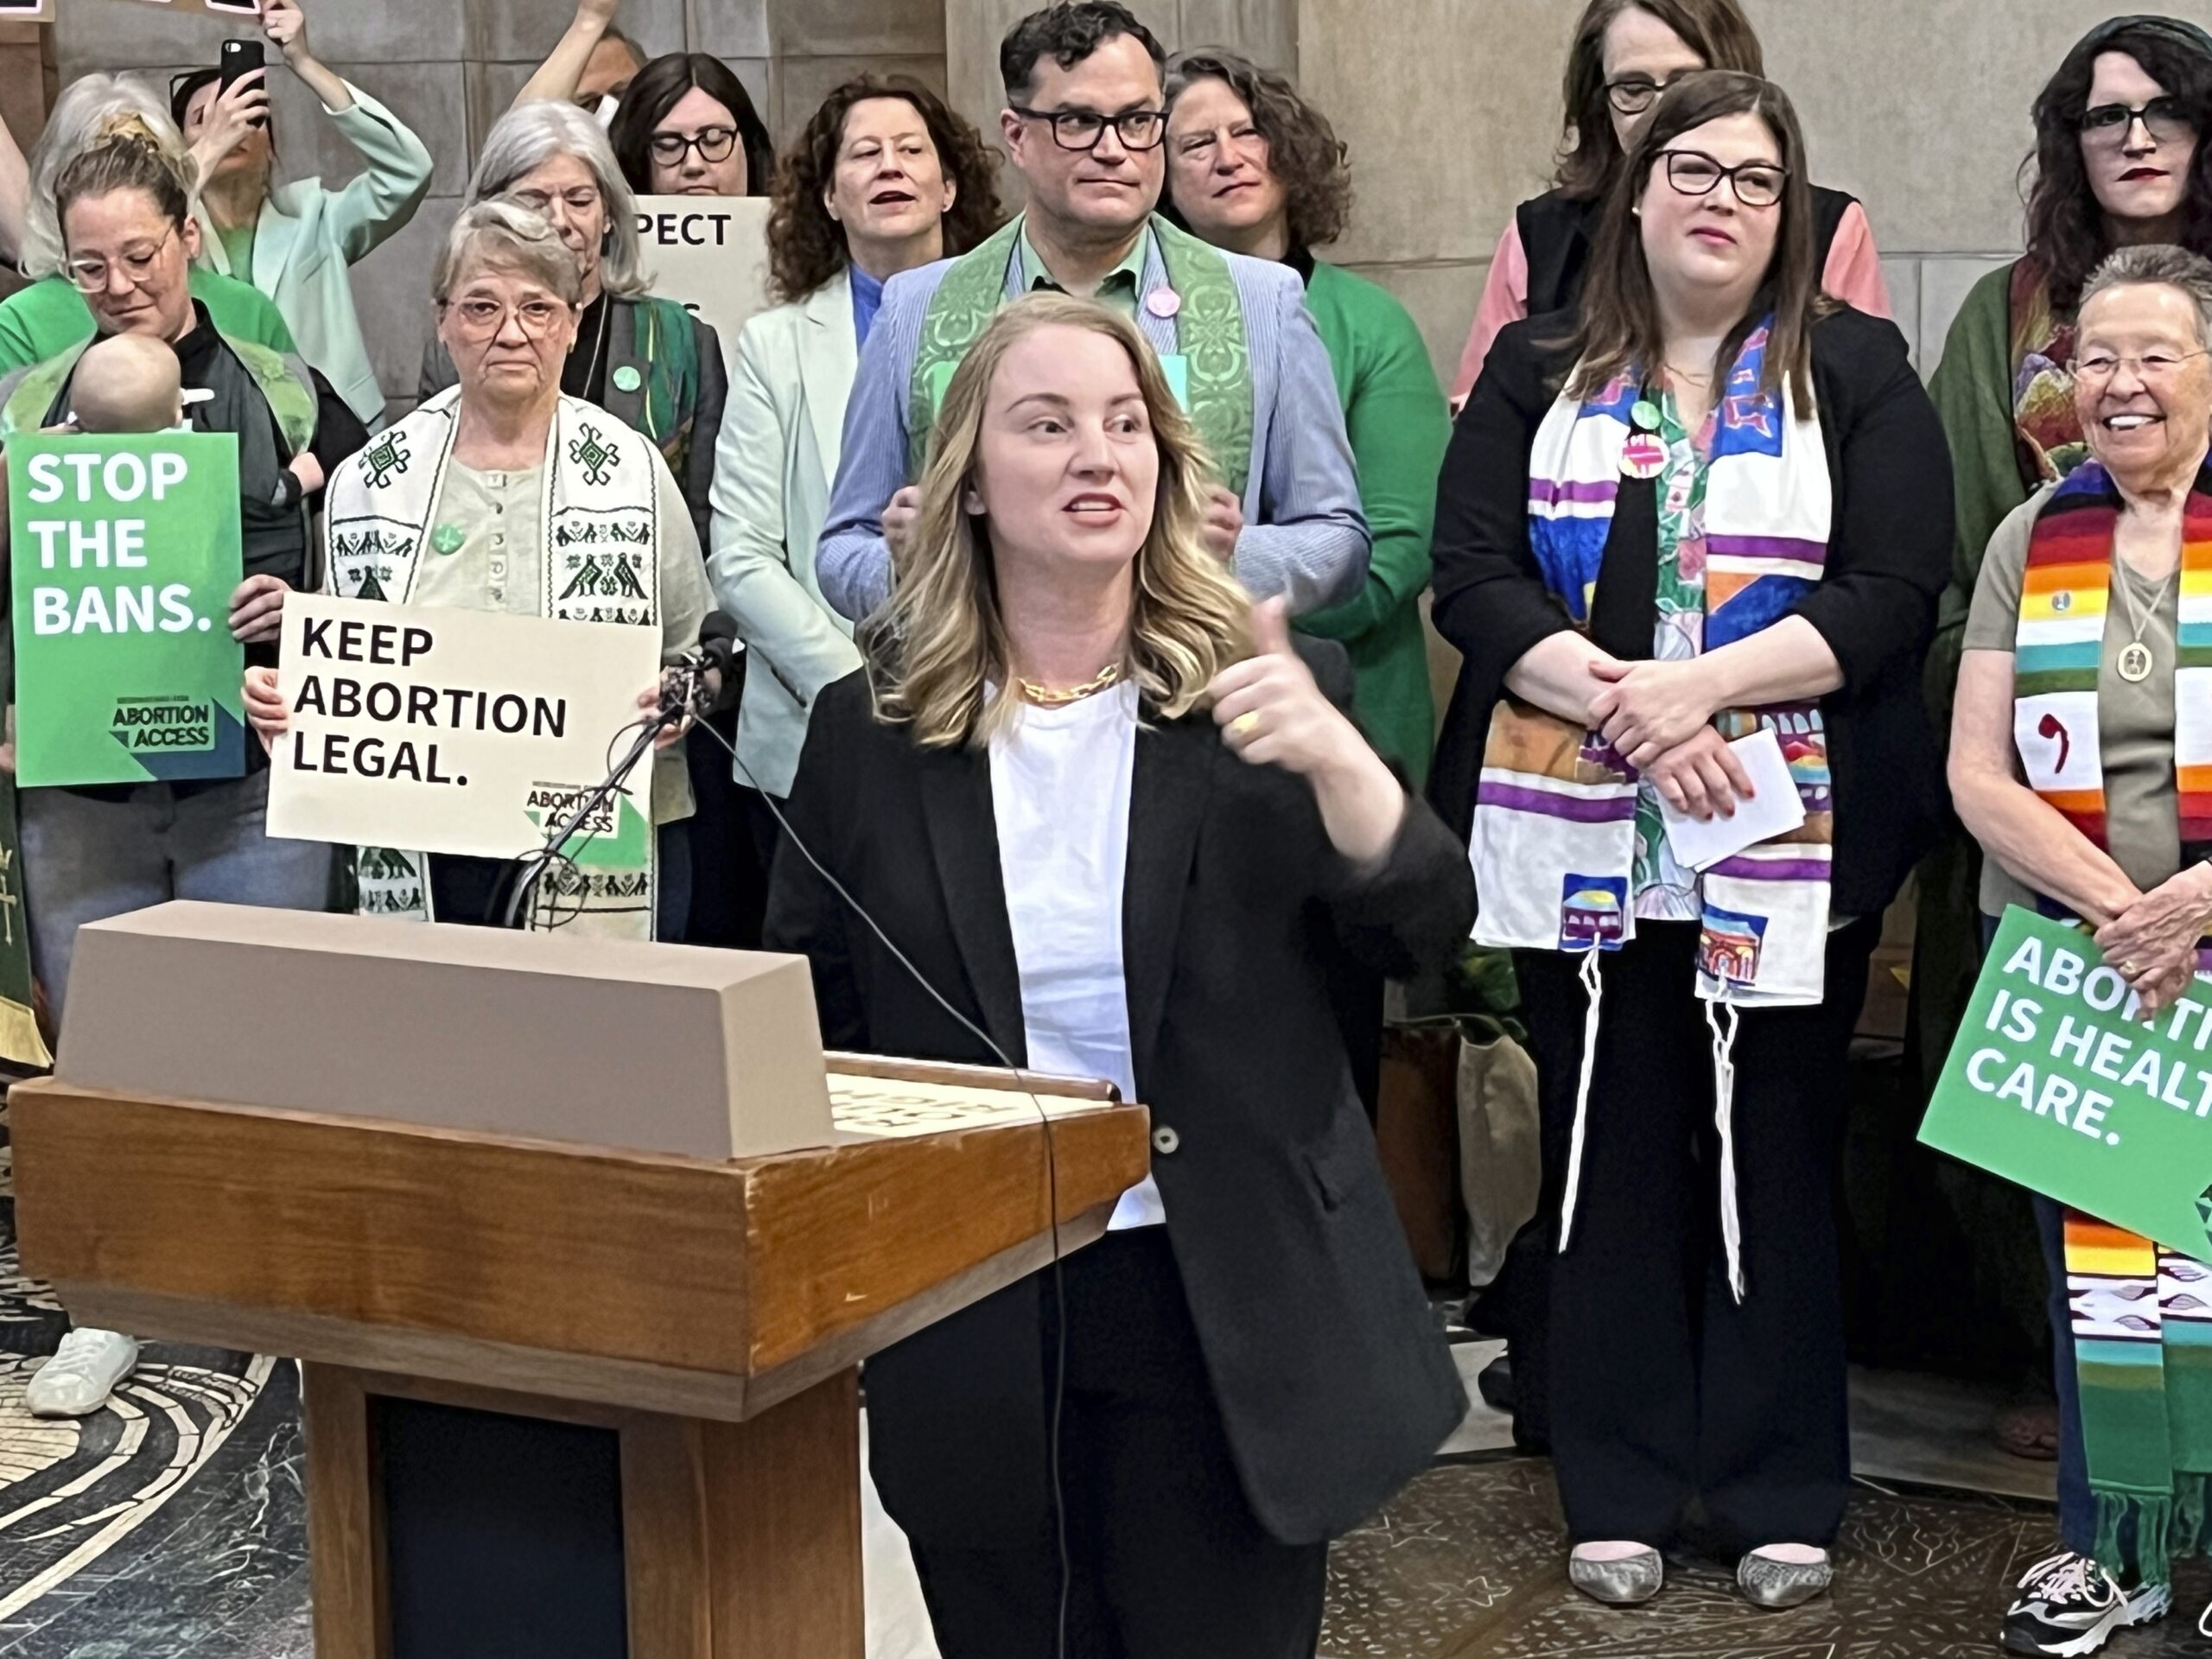 ‘What the F*ck is Wrong With You?’ Nebraska Lawmaker Megan Hunt Deploys F Bombs, Explains She Doesn’t Talk to People Who Oppose ‘Basic Civil Rights Sh*t’ (mediaite.com)